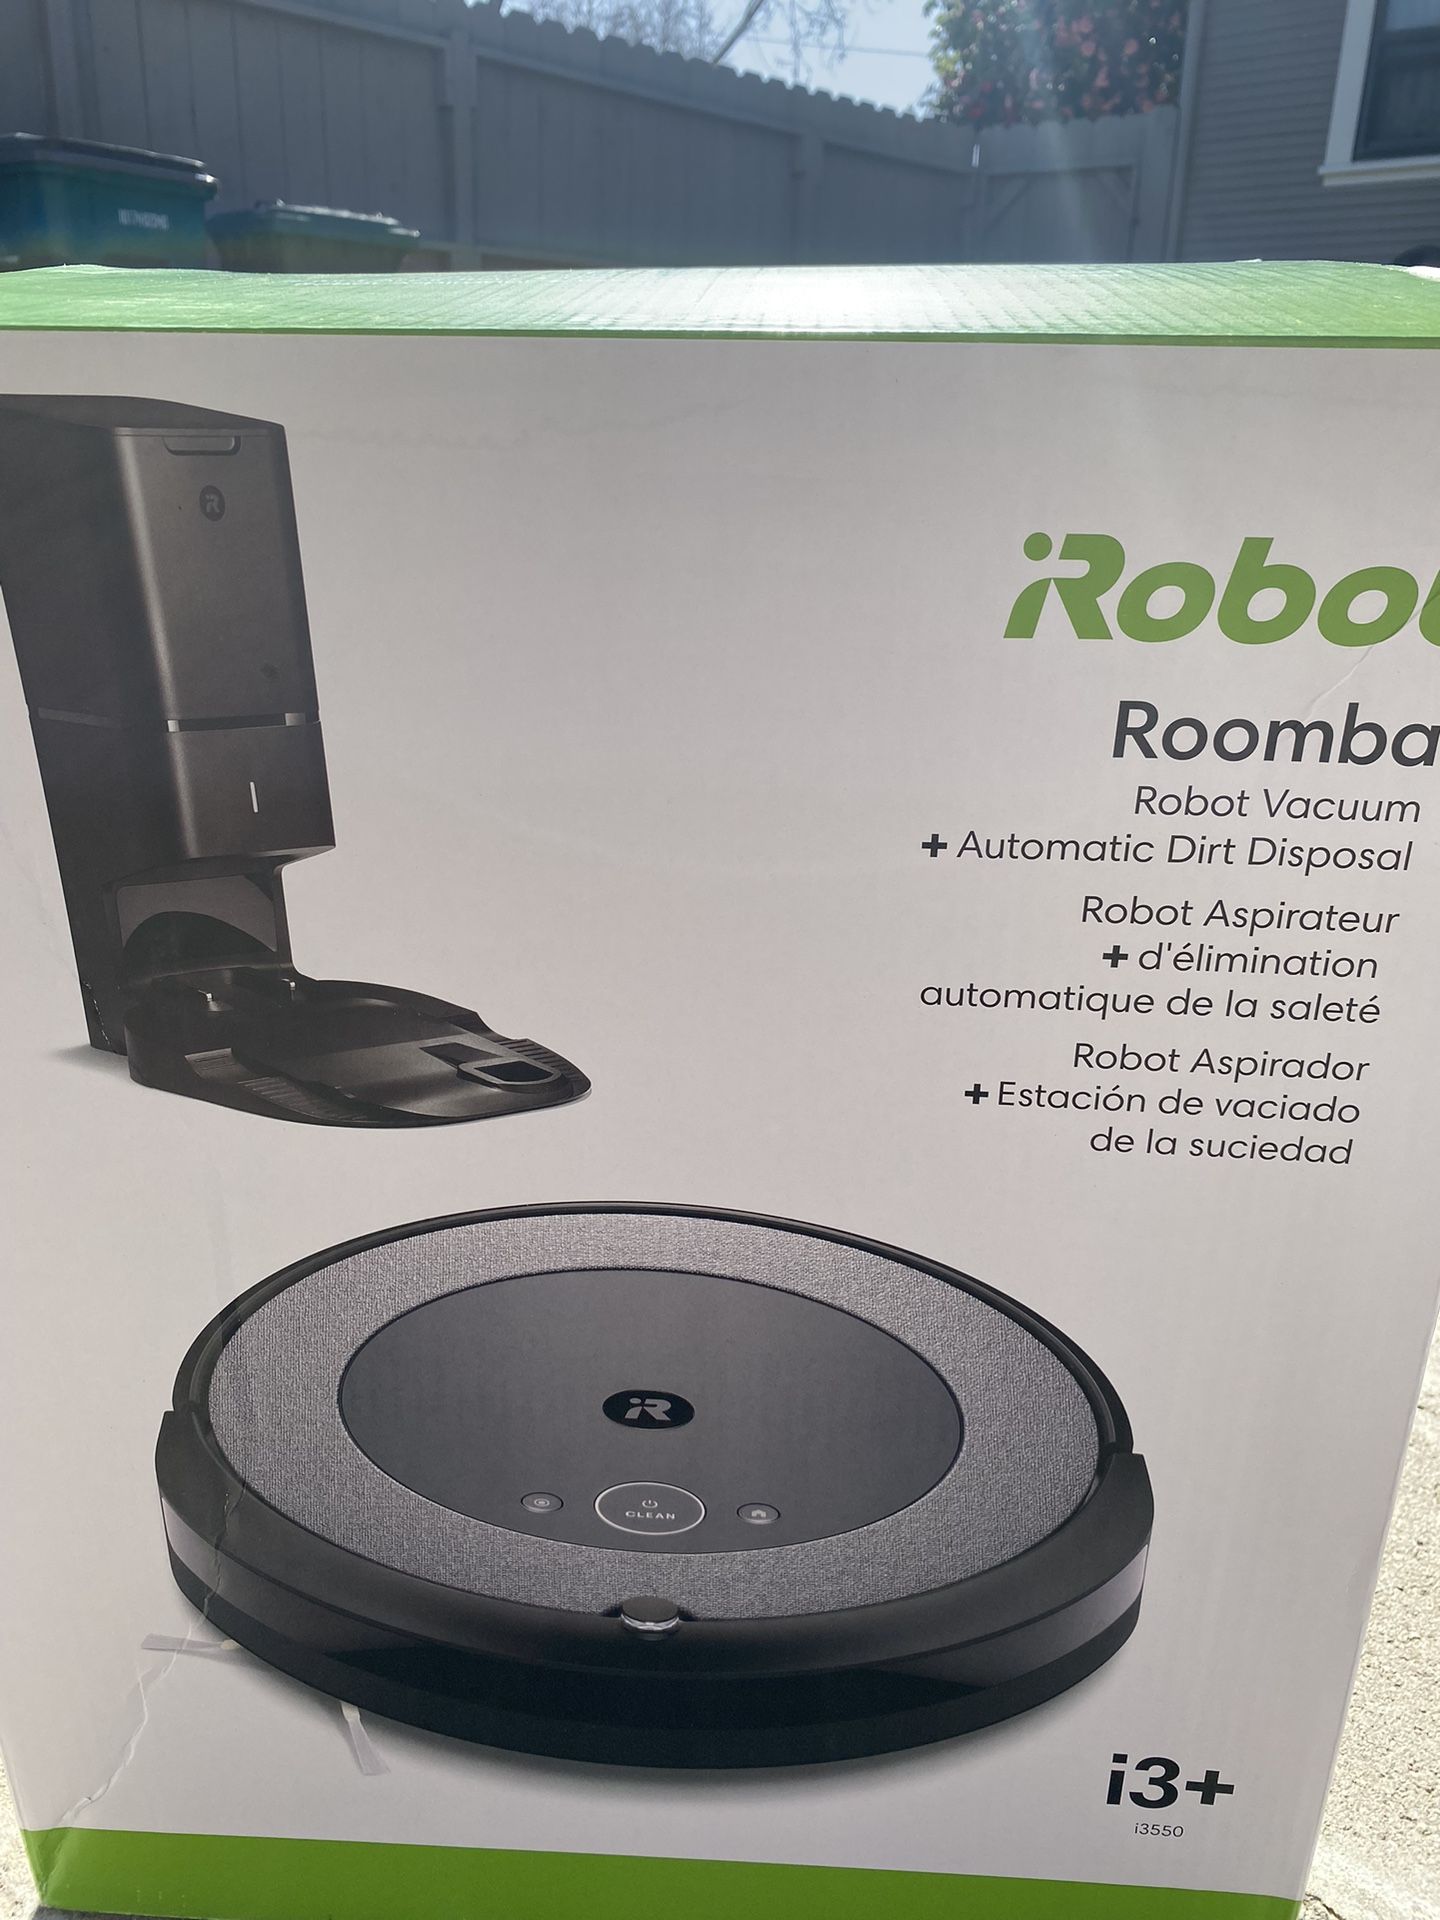 iRobot Roomba i3+ EVO (3550) Self-Emptying Robot Vacuum – Now Clean by Room with Smart Mapping, Empties Itself for Up to 60 Days, Works with Alexa, Id